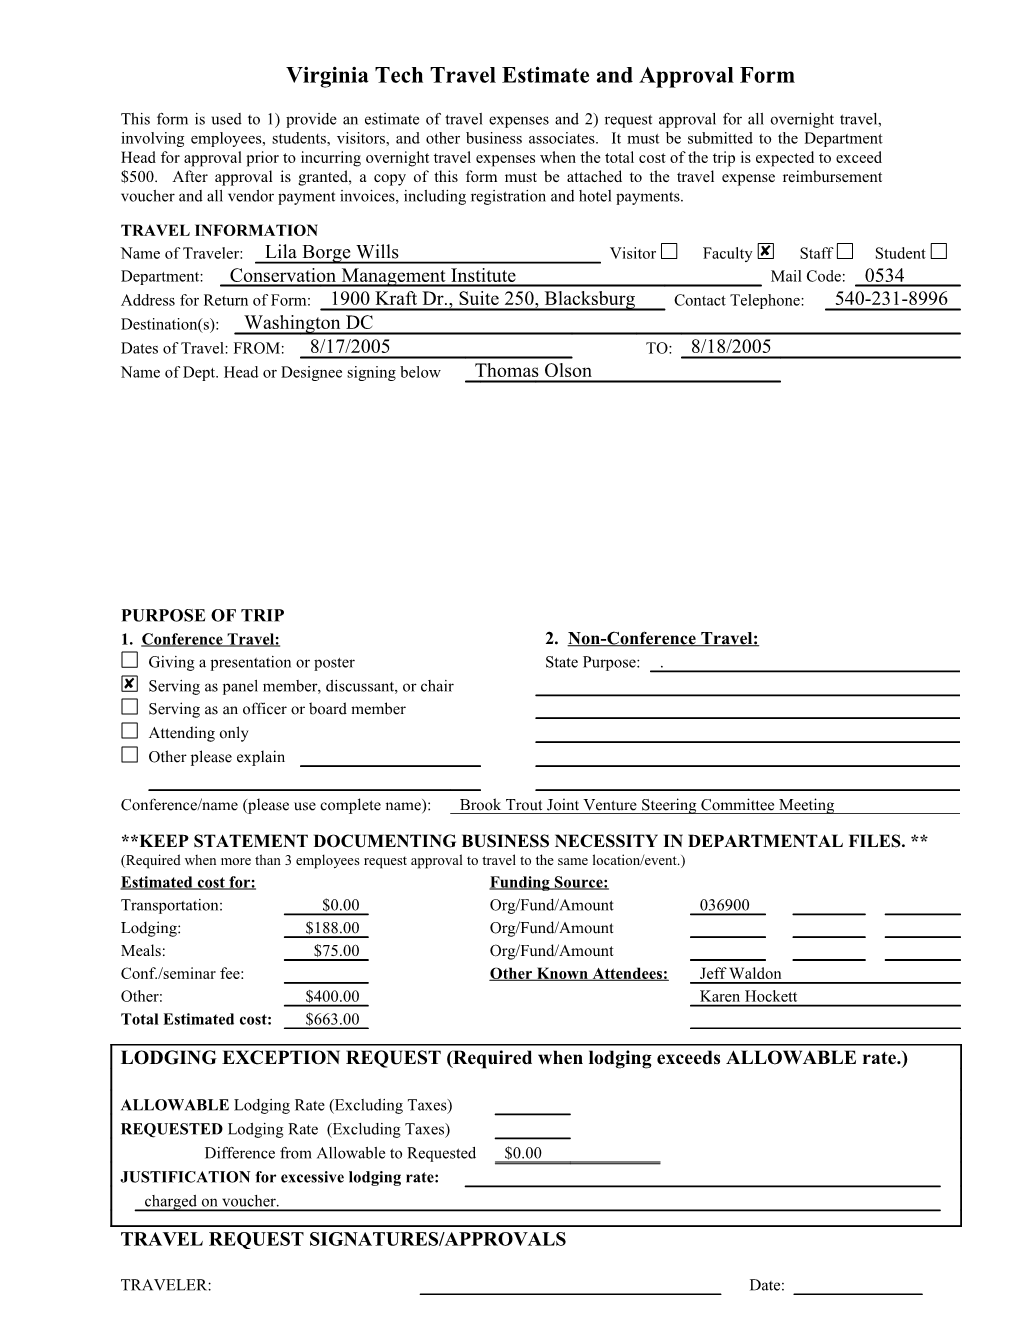 Virginia Tech Travel Estimate and Approval Form